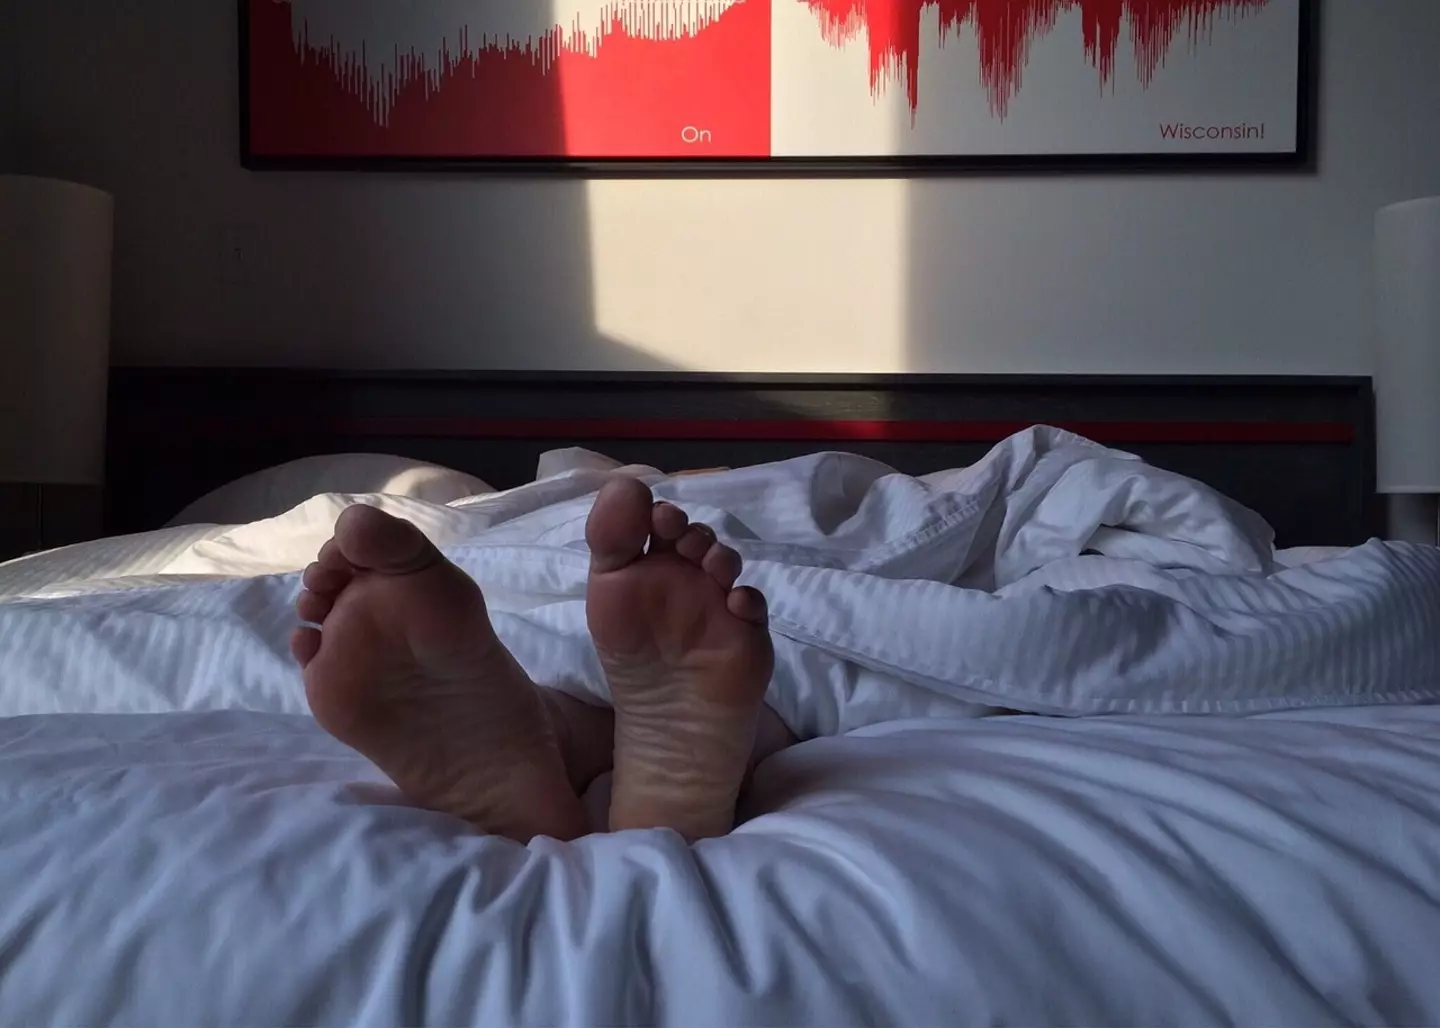 How your partner acts in bed could tell you if they're being unfaithful.